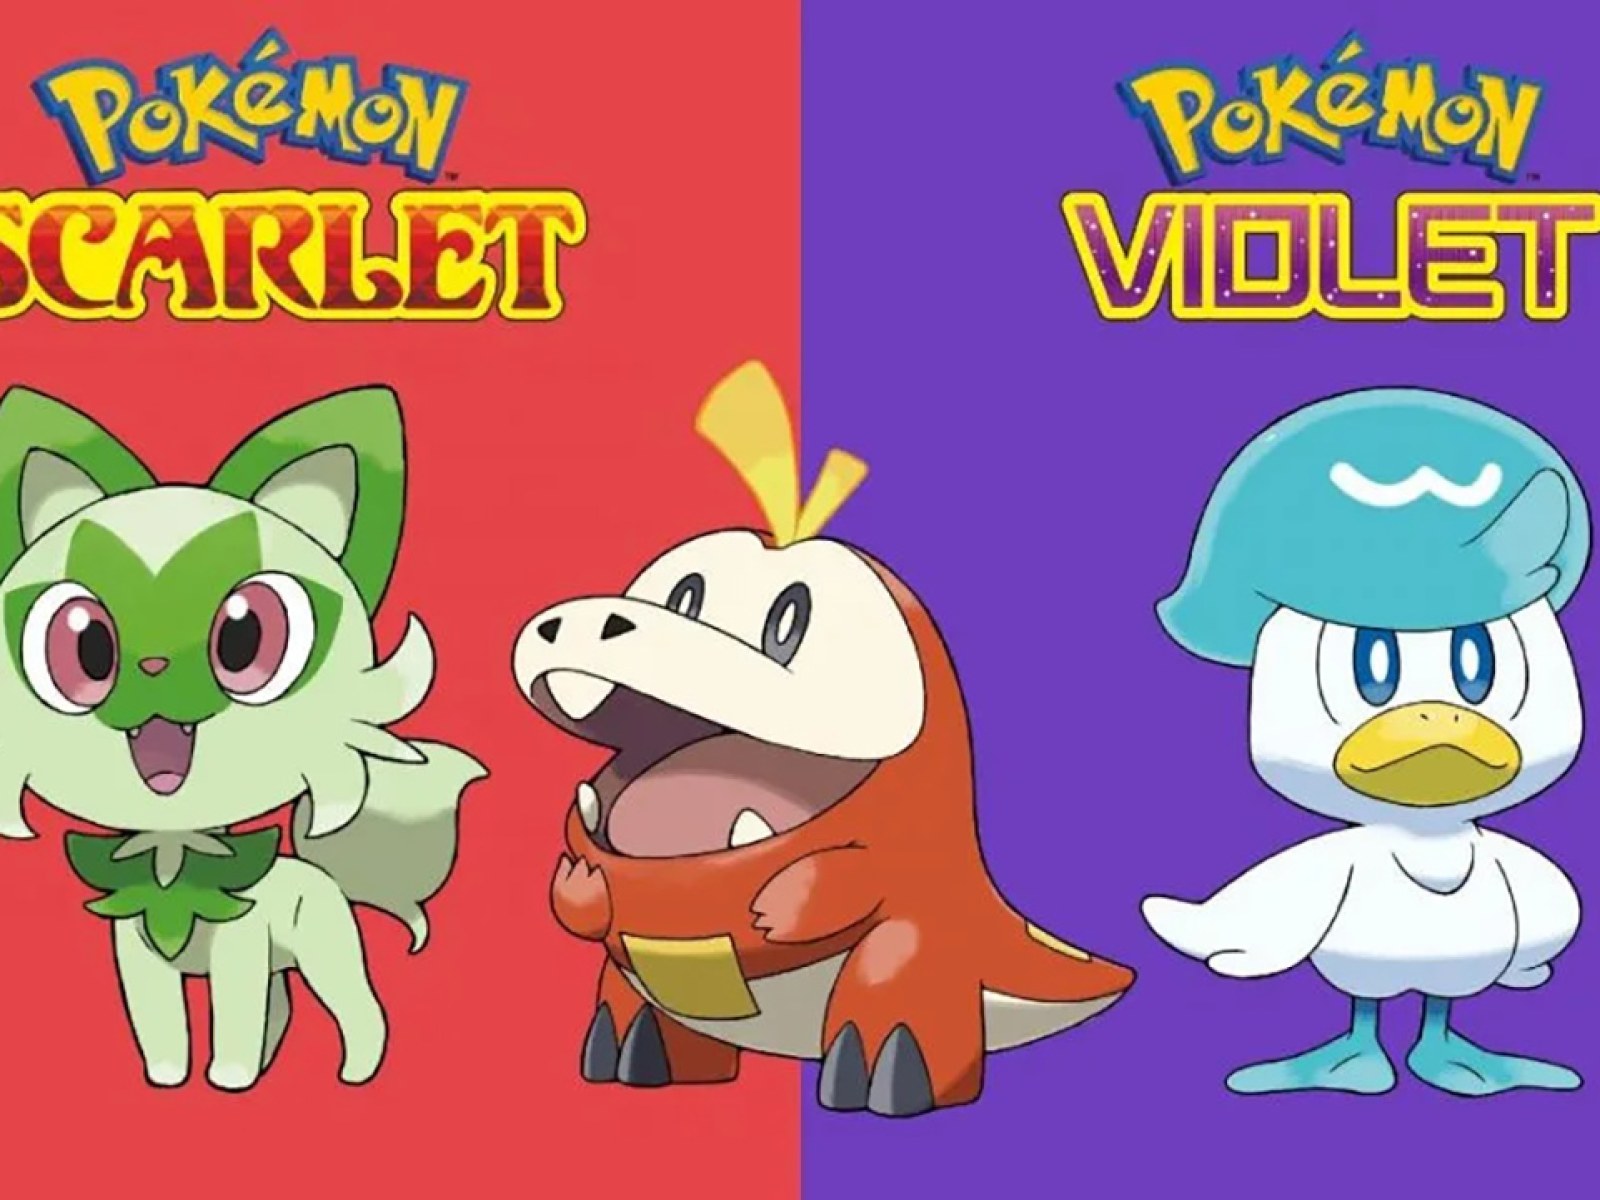 Pokemon and Violet: to Choose Starter